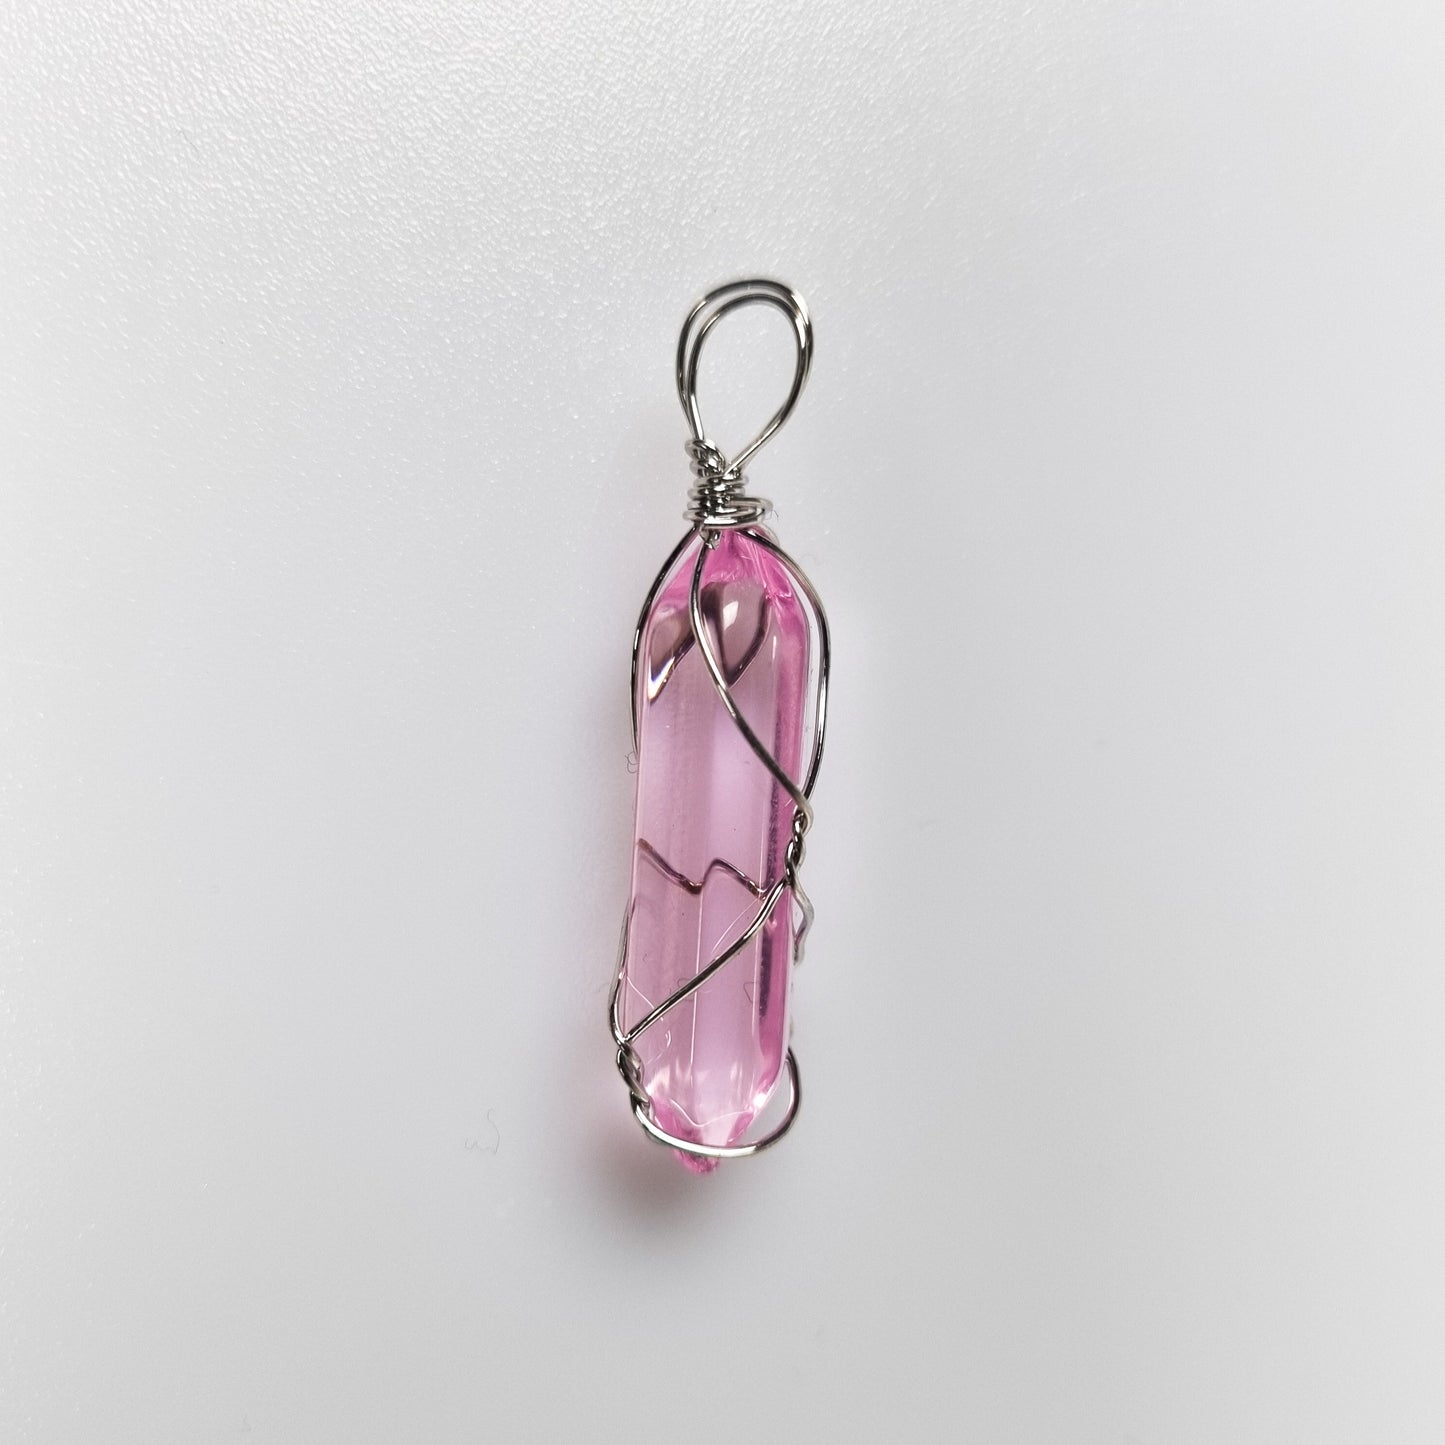 Caged Kyber Crystal Pendants